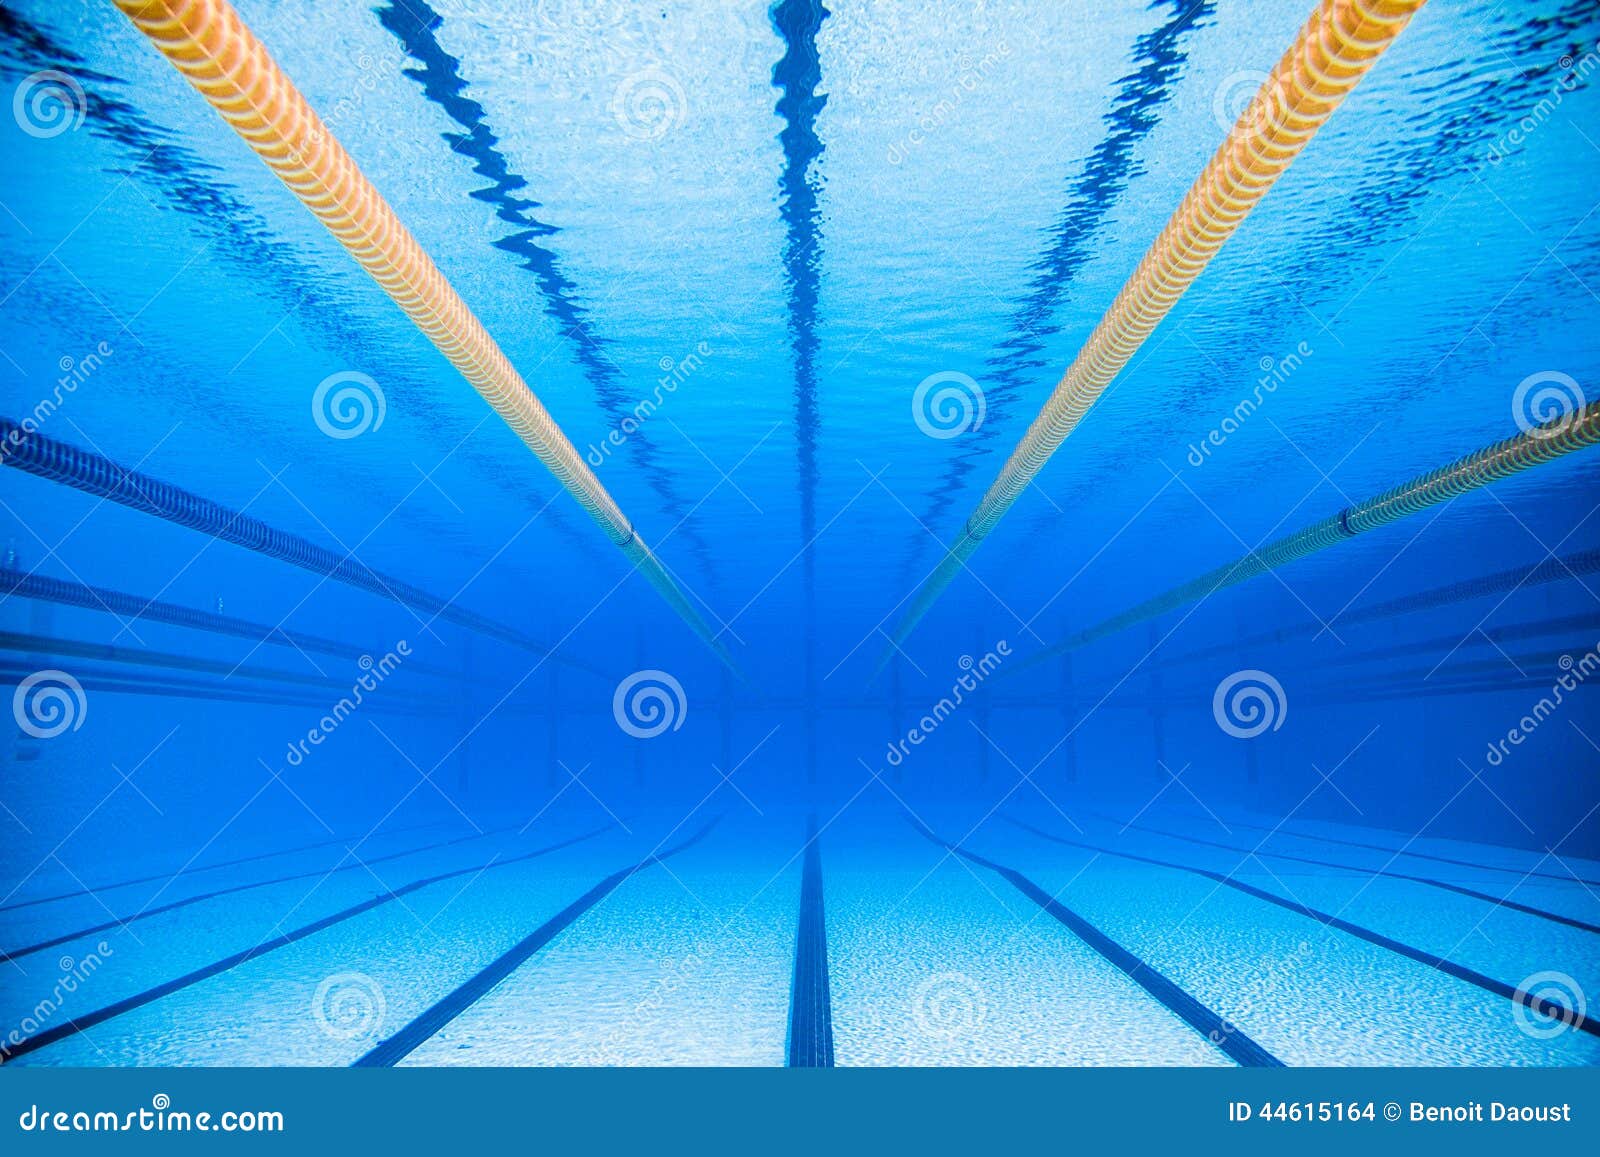 empty 50m olympic outdoor pool from underwater